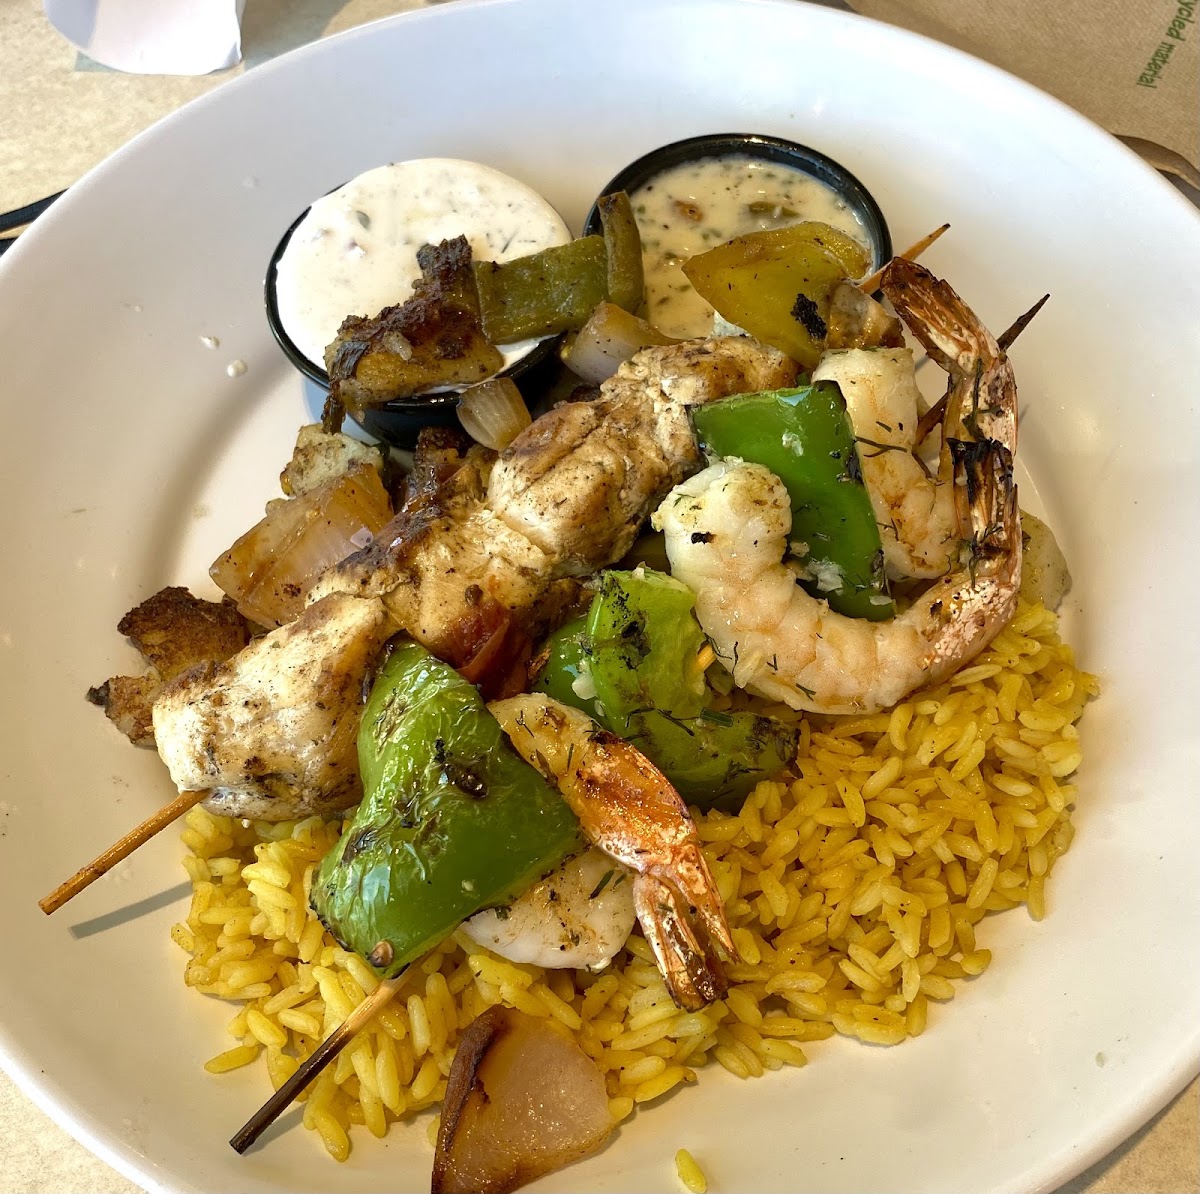 Chicken and shrimp kabob with rice and grilled potato salad.